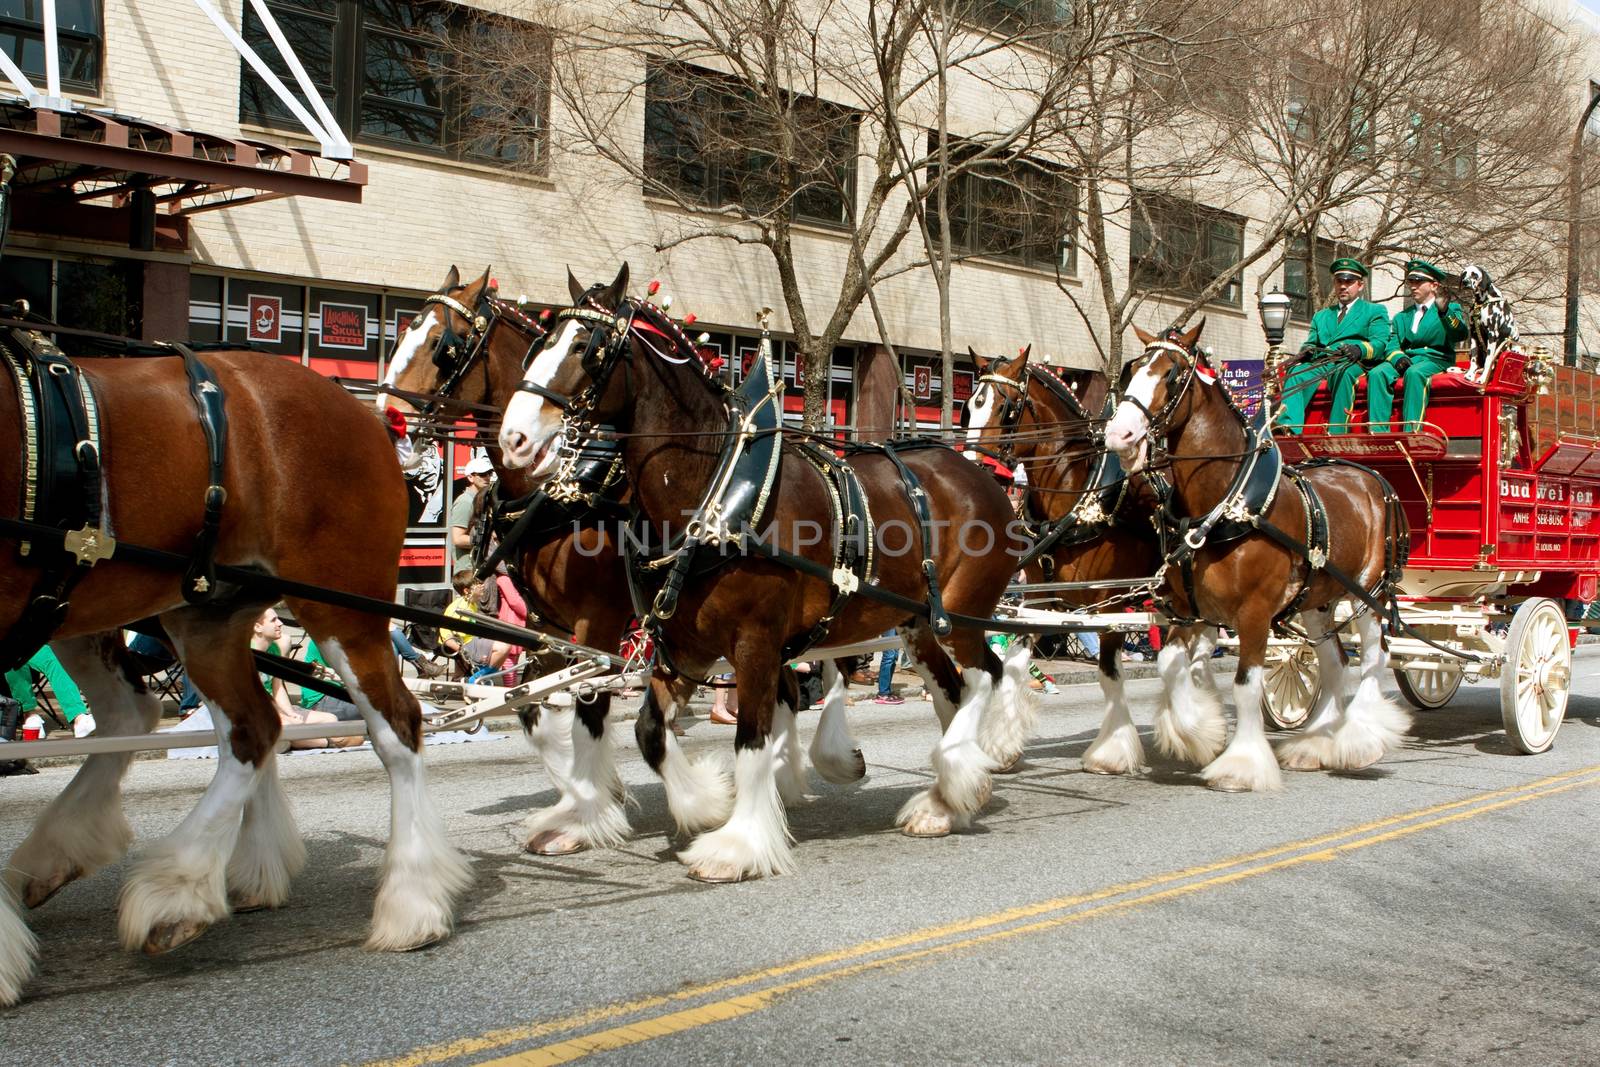 Atlanta, GA, USA - March 15, 2014:  The famous Budweiser Clydesdales trot down Peachtree Street in the St. Patrick's parade.